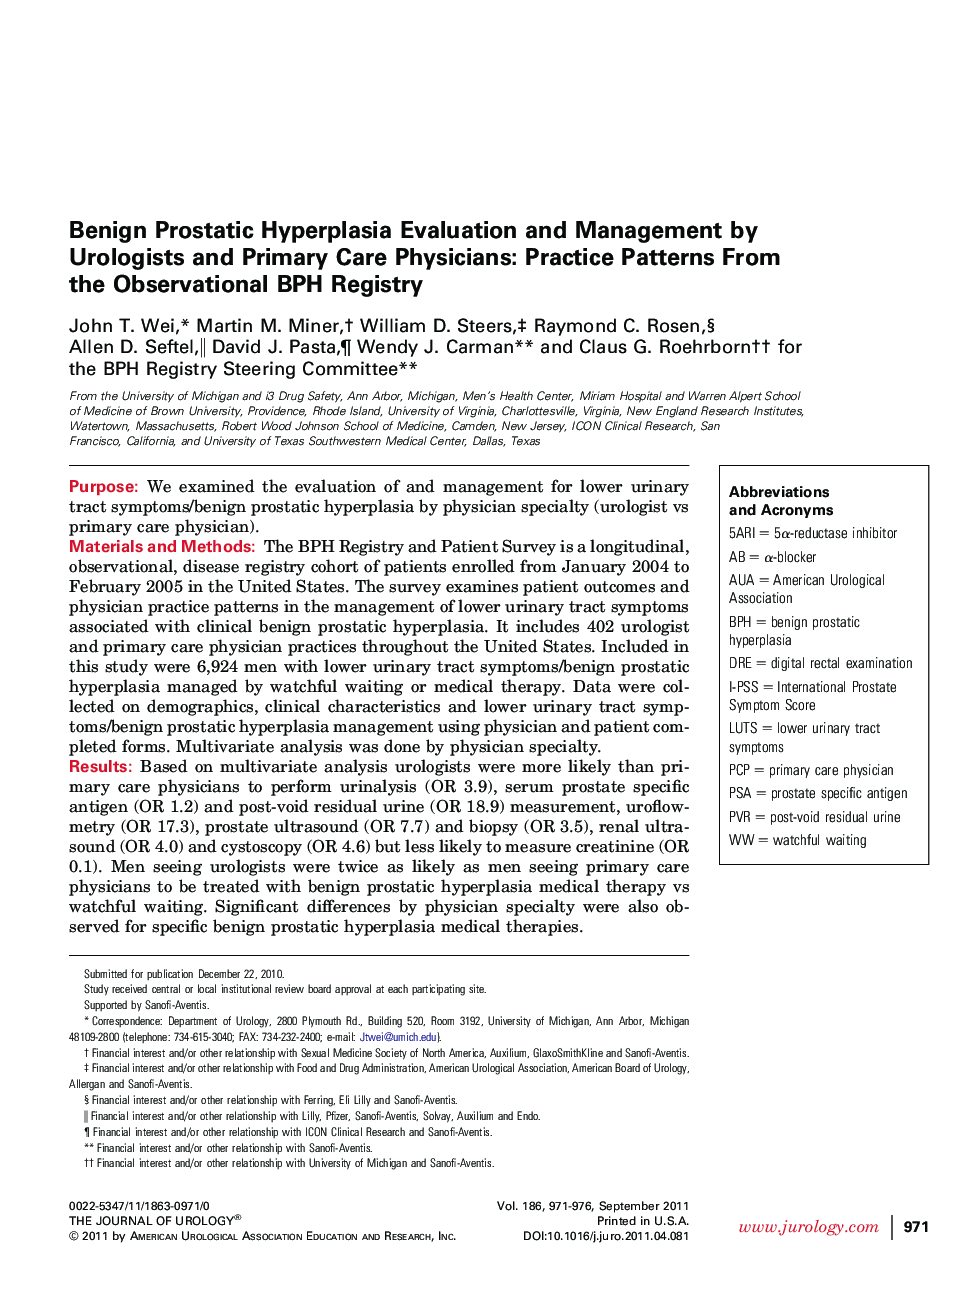 Benign Prostatic Hyperplasia Evaluation and Management by Urologists and Primary Care Physicians: Practice Patterns From the Observational BPH Registry